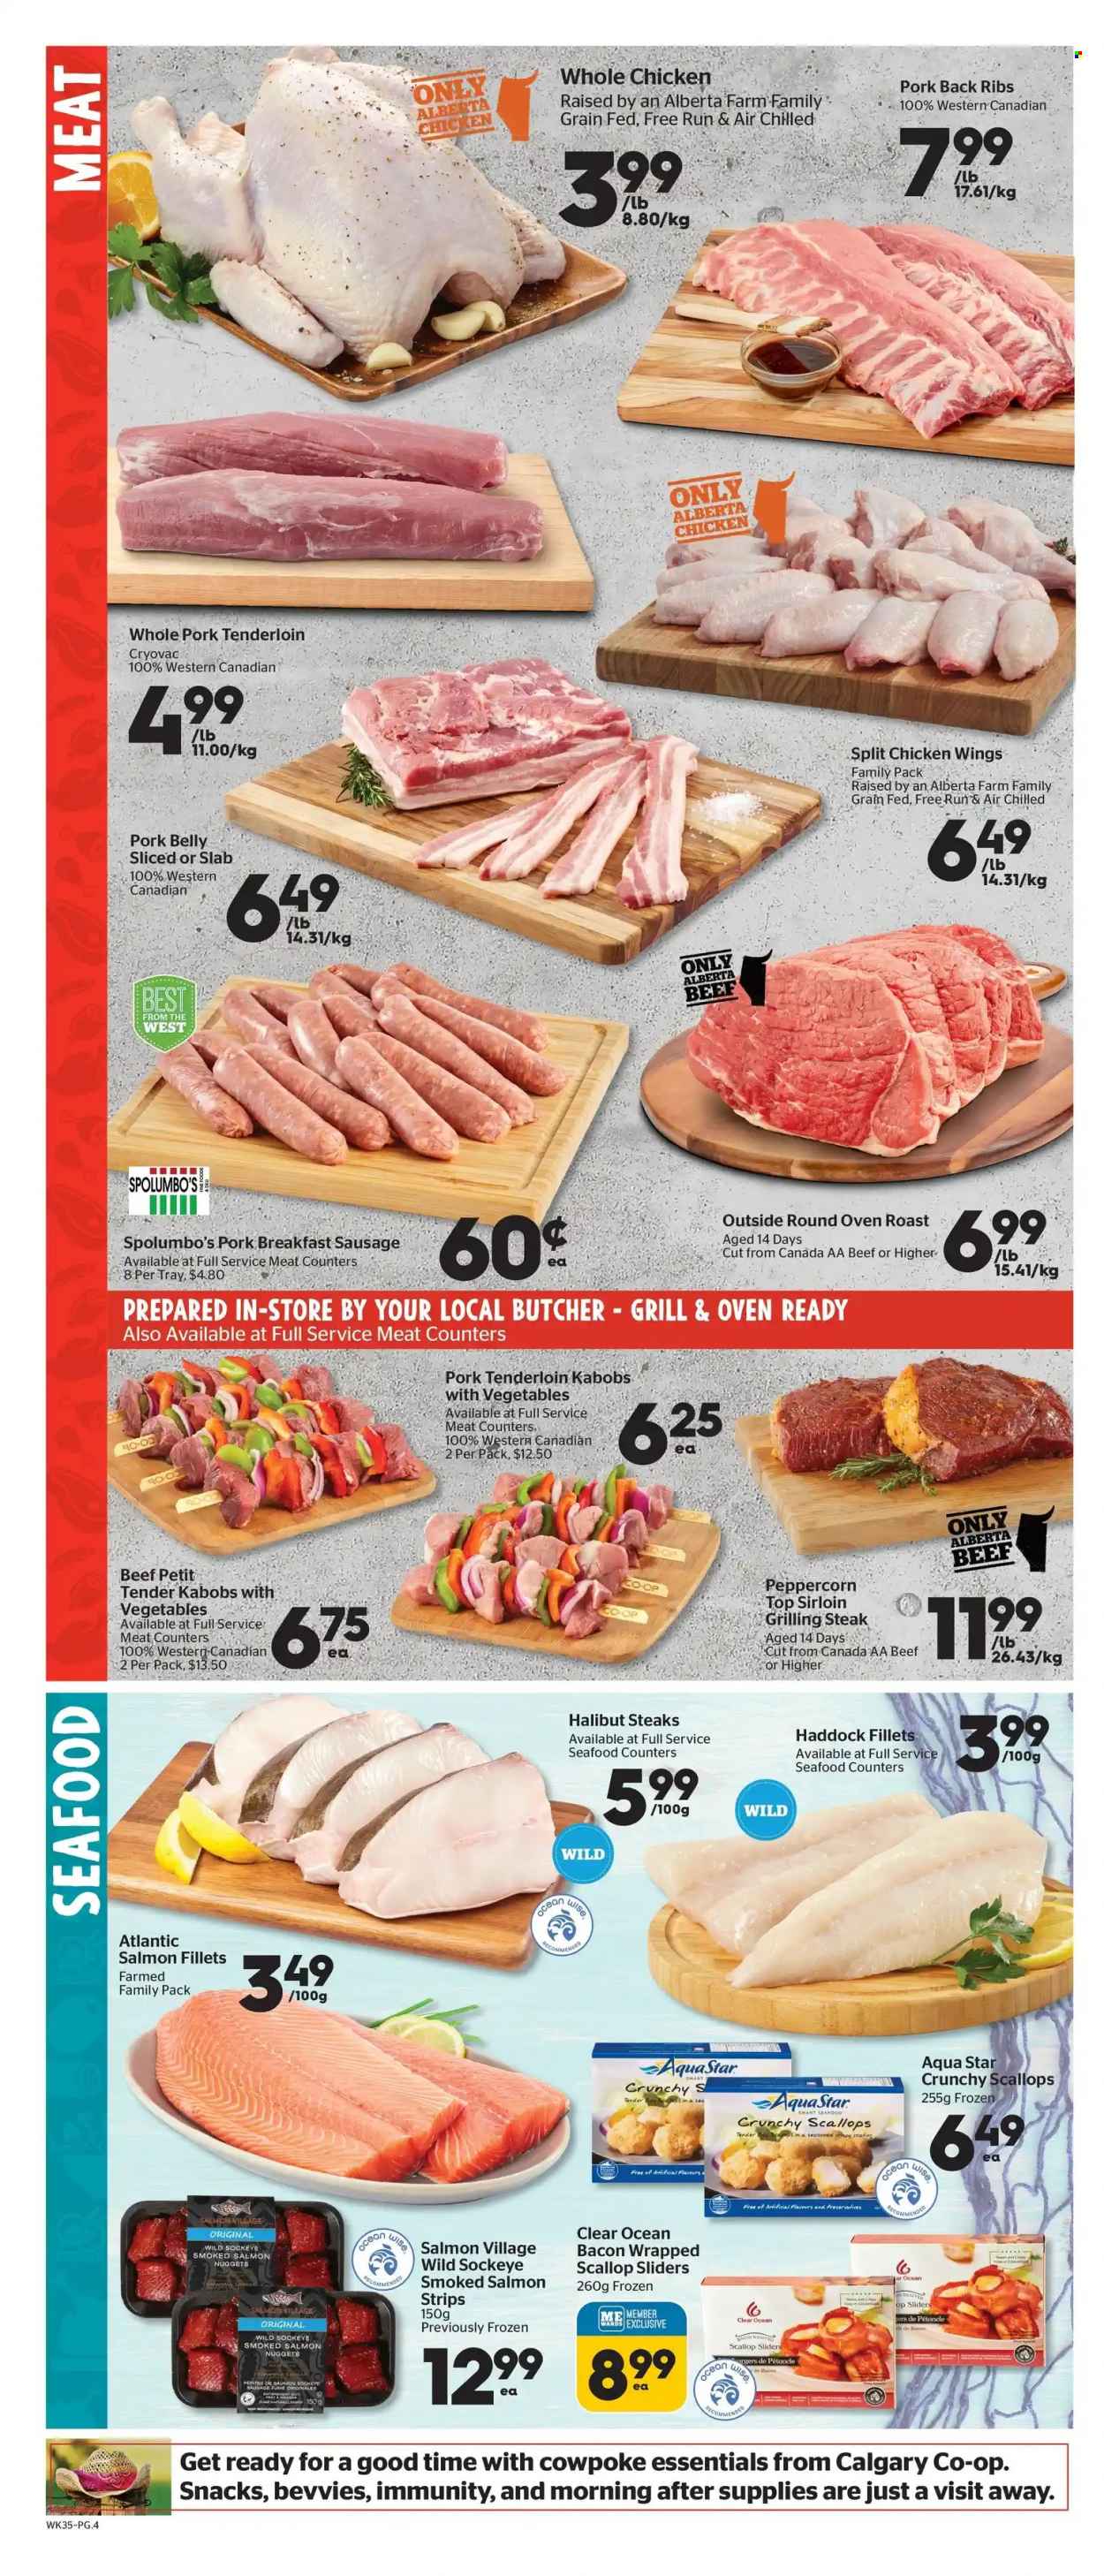 thumbnail - Calgary Co-op Flyer - June 30, 2022 - July 06, 2022 - Sales products - salmon, salmon fillet, scallops, smoked salmon, haddock, halibut, seafood, nuggets, bacon, sausage, chicken wings, strips, snack, whole chicken, chicken, pork belly, pork meat, pork ribs, pork tenderloin, pork back ribs, steak. Page 5.